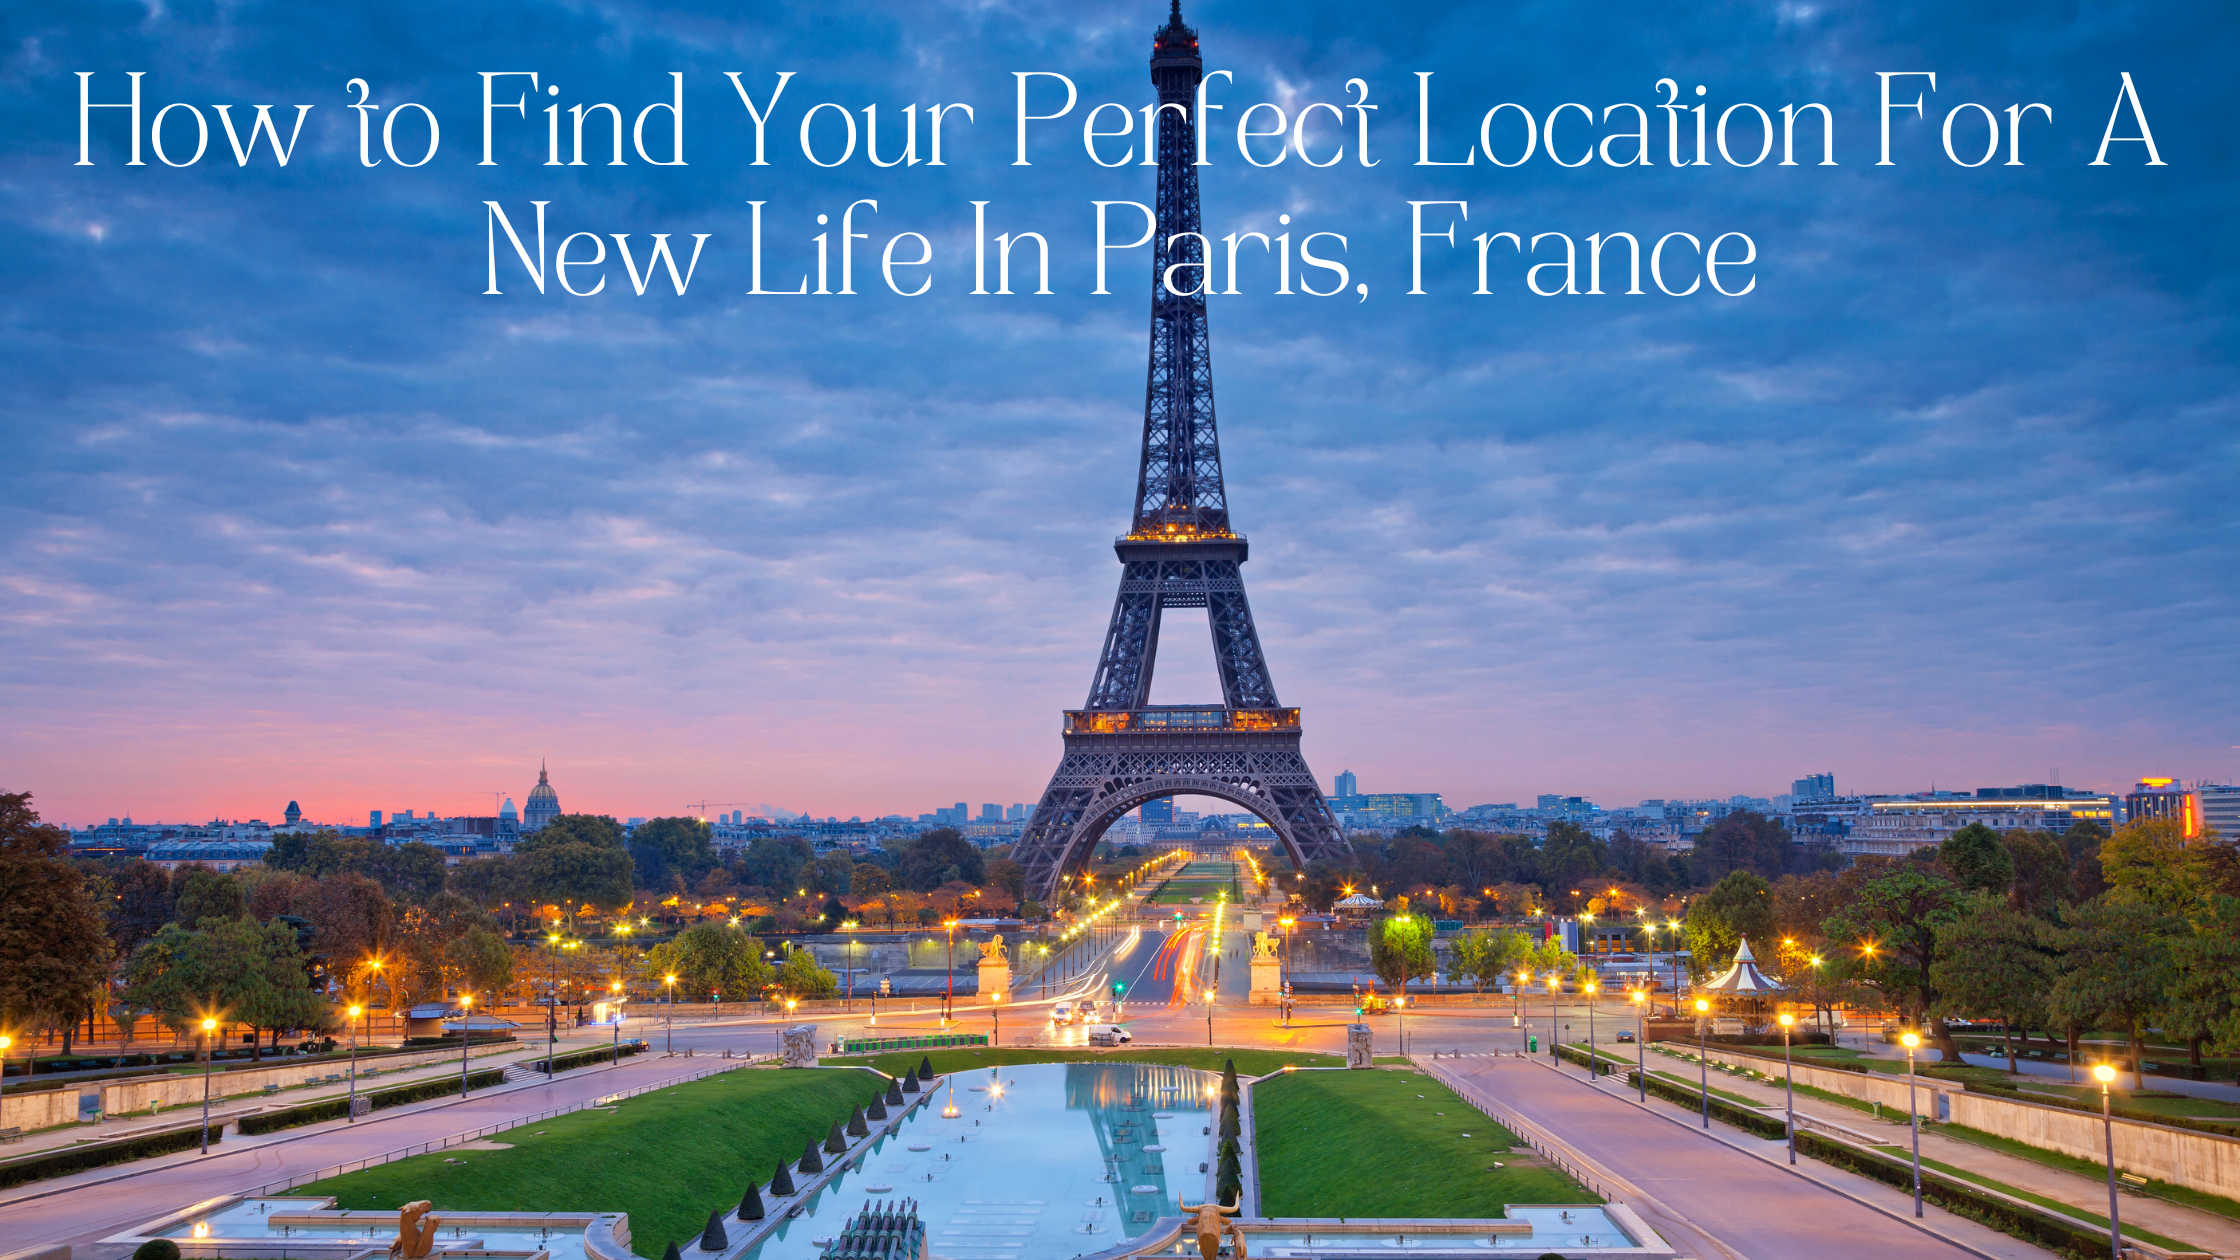 How to Find Your Perfect Location For A New Life In Paris, France